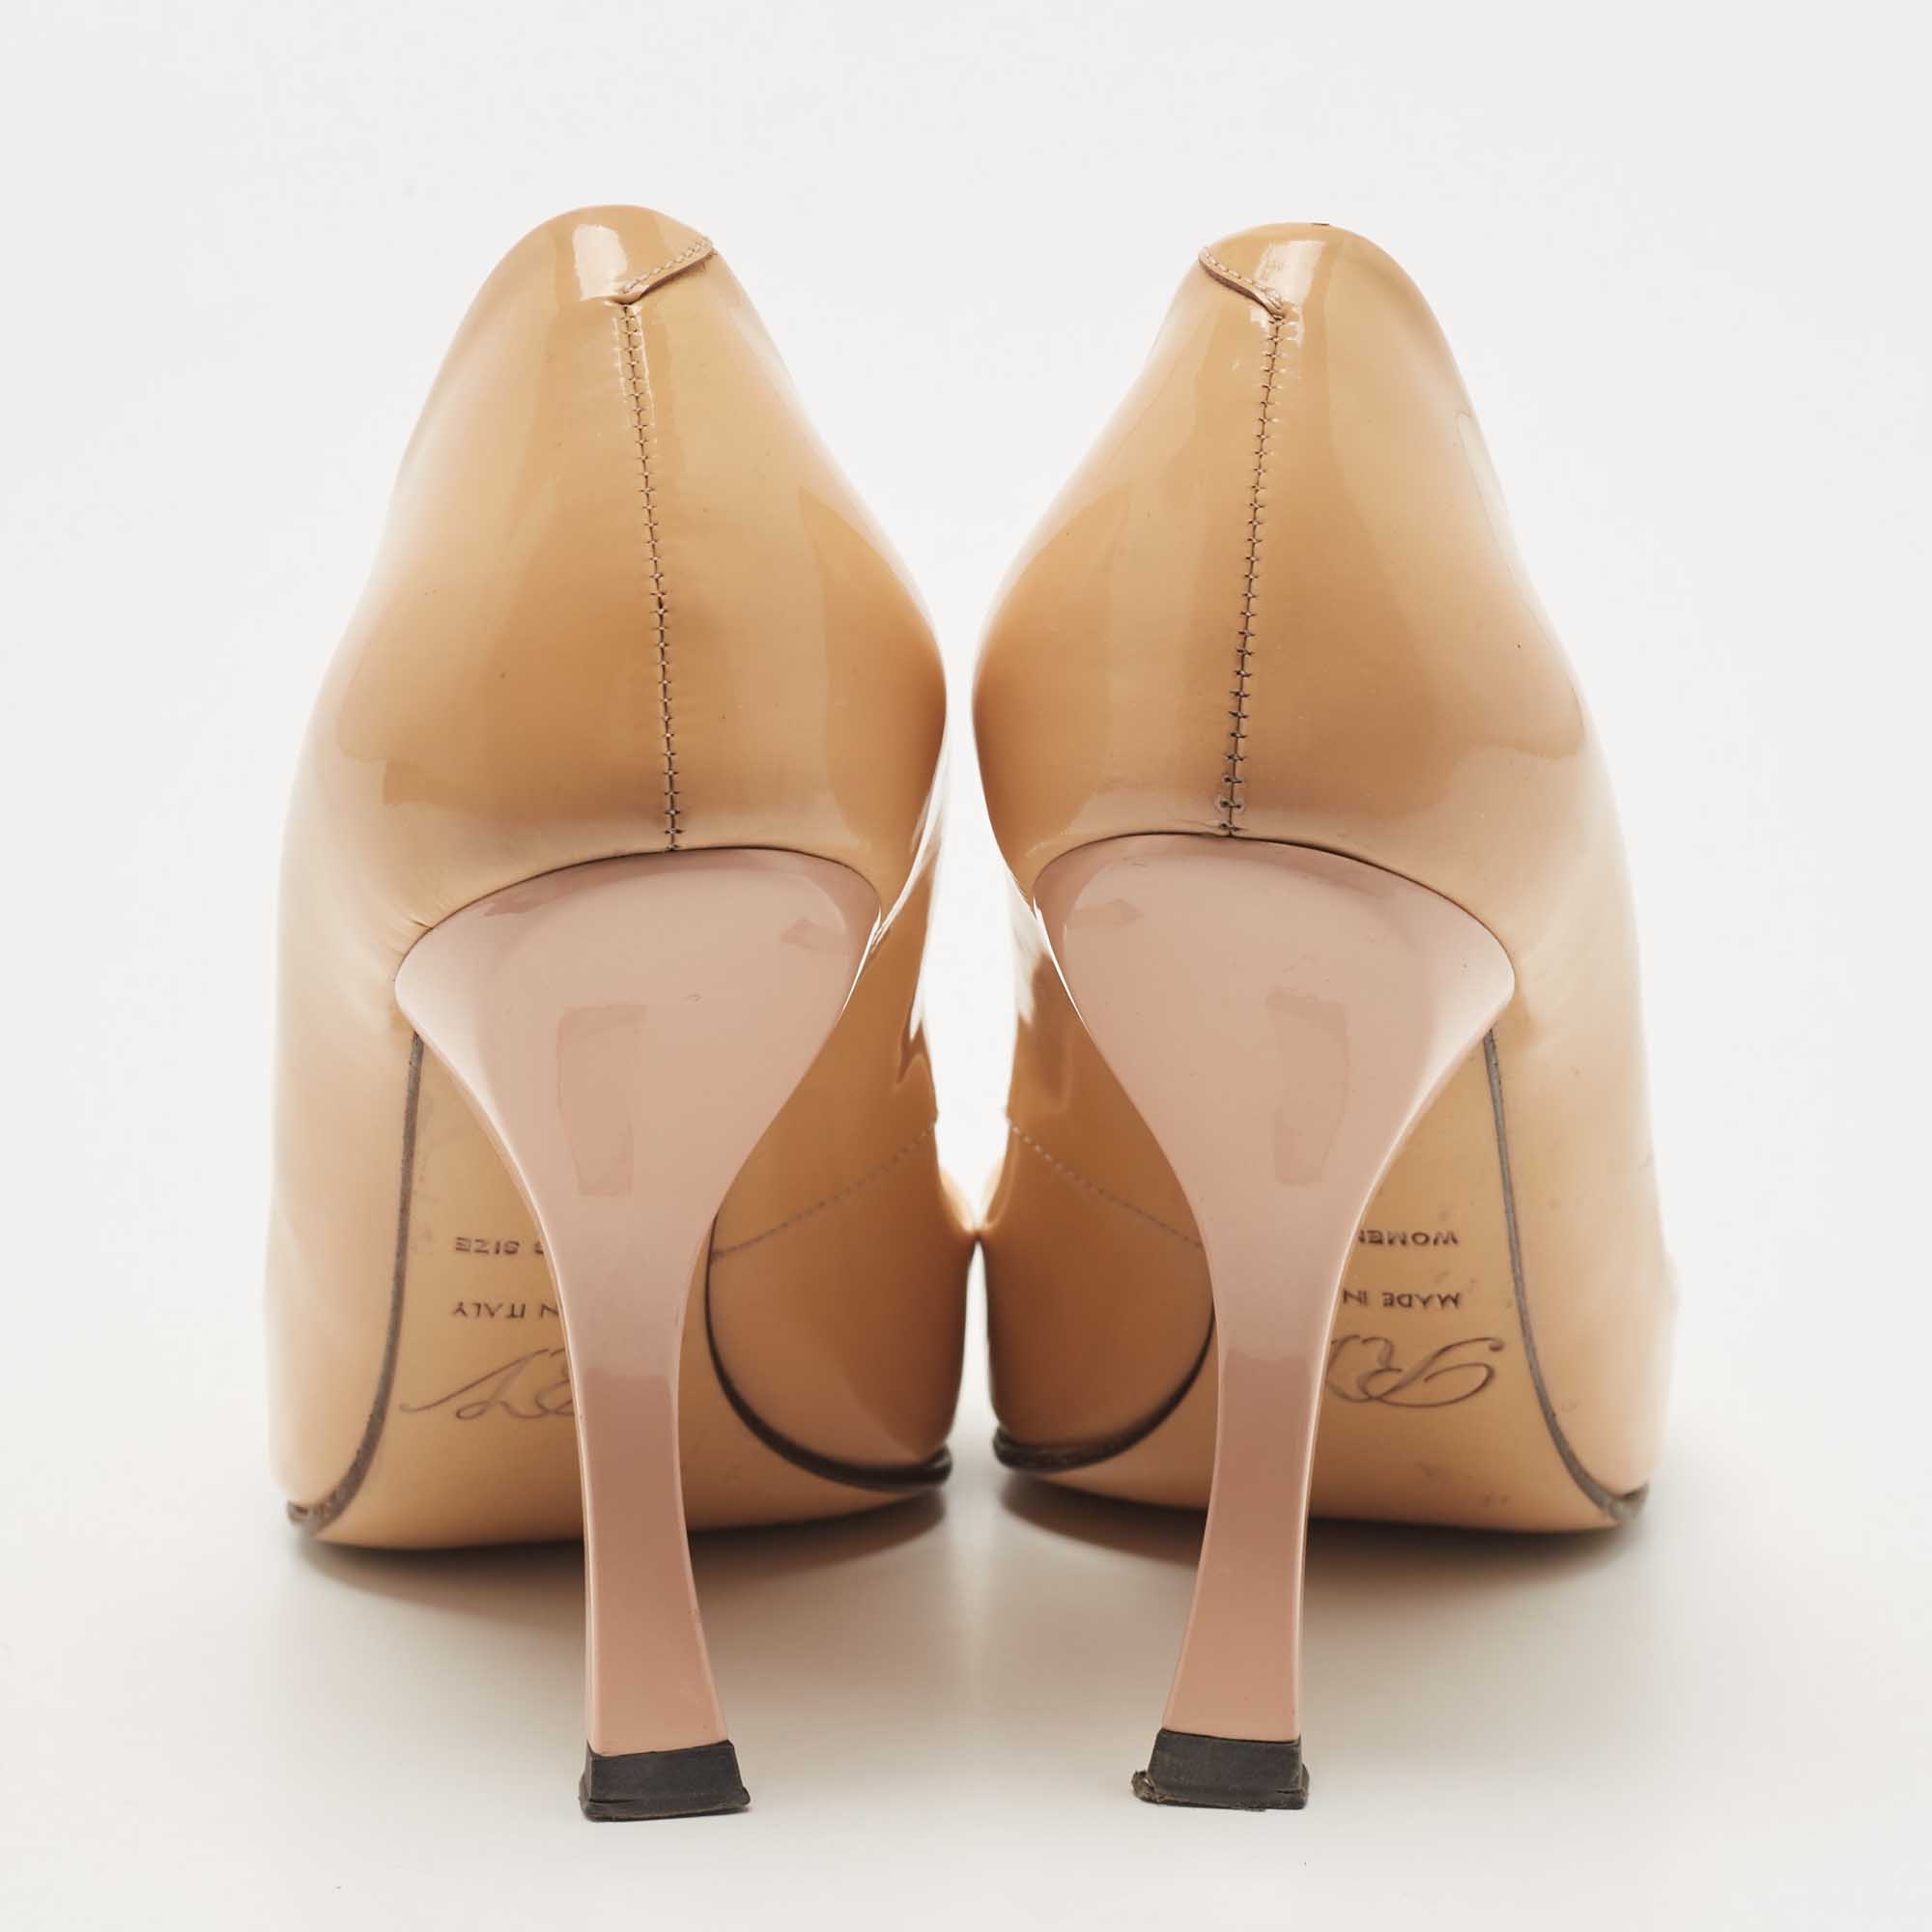 Roger Vivier Beige Patent Leather Pointed Toe Pumps Size 35